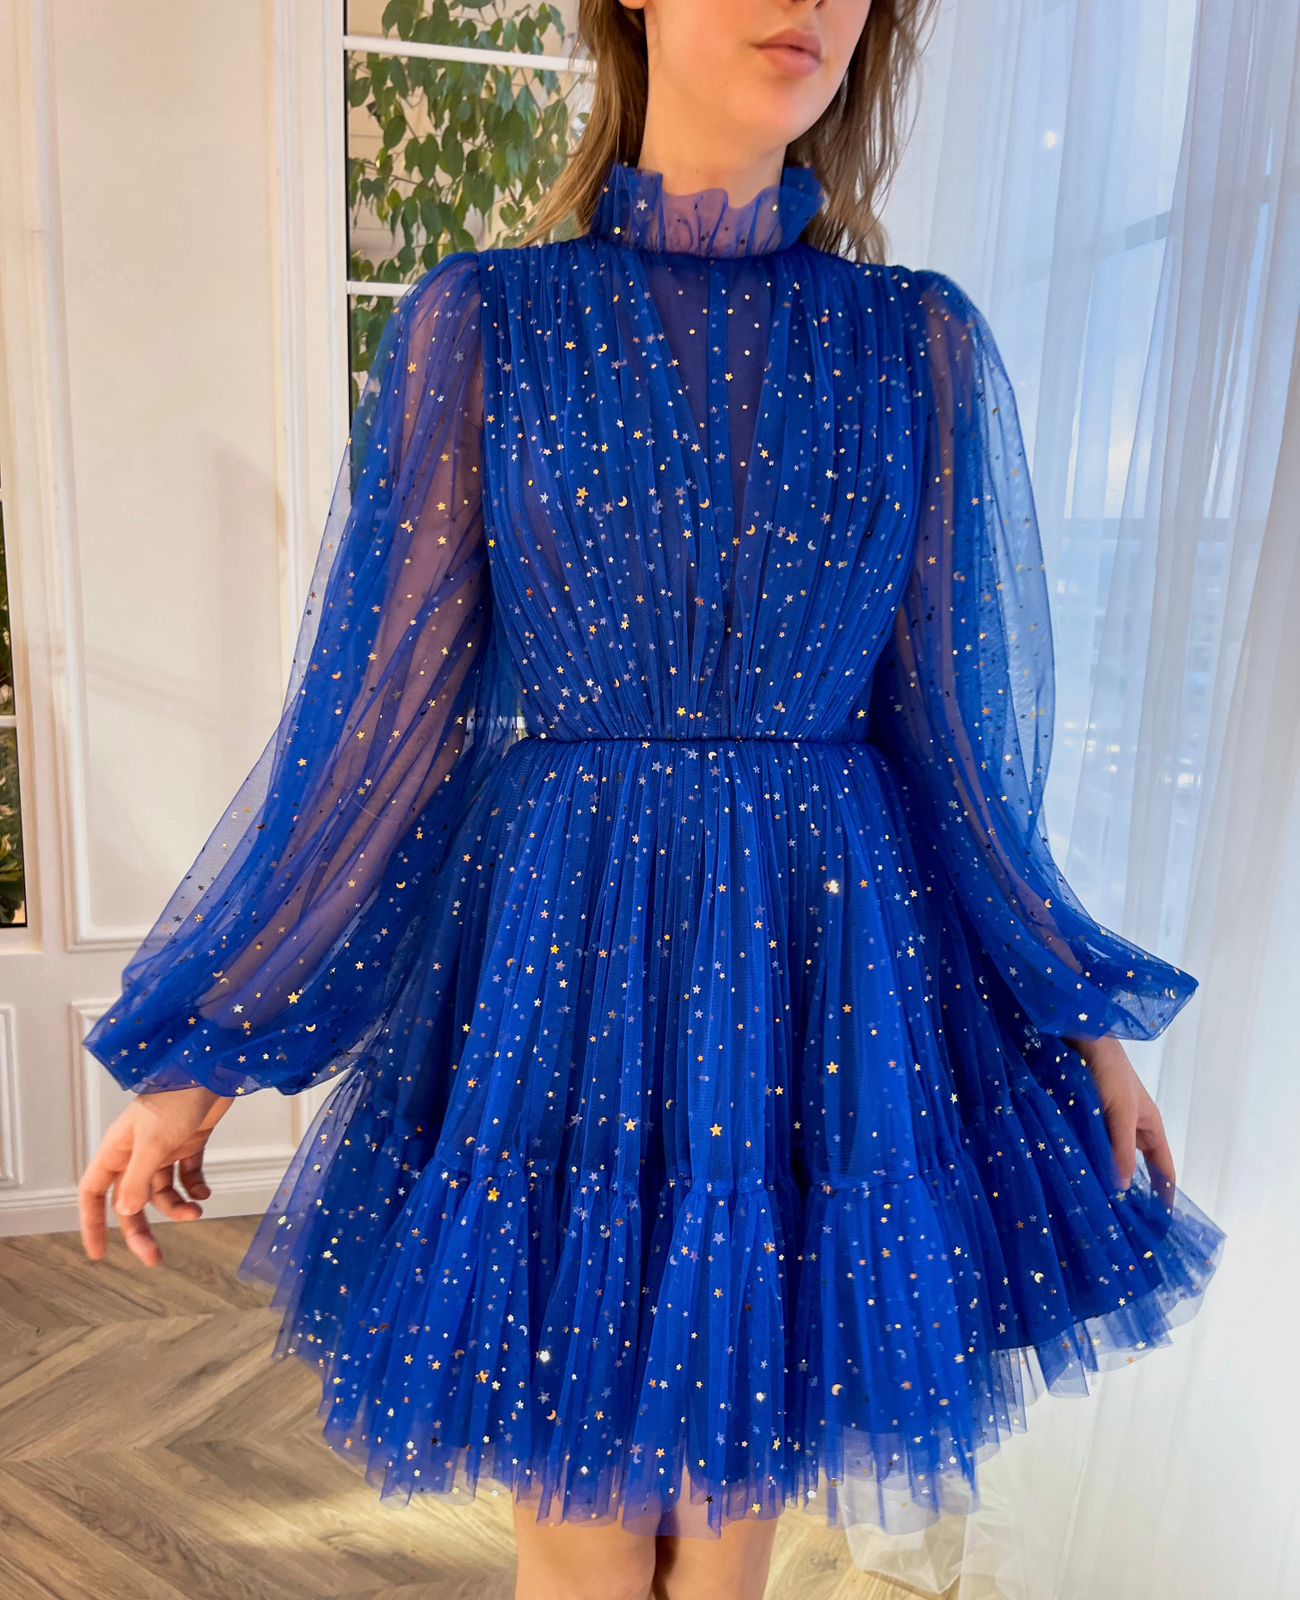 Blue mini dress with long sleeves and starry fabric